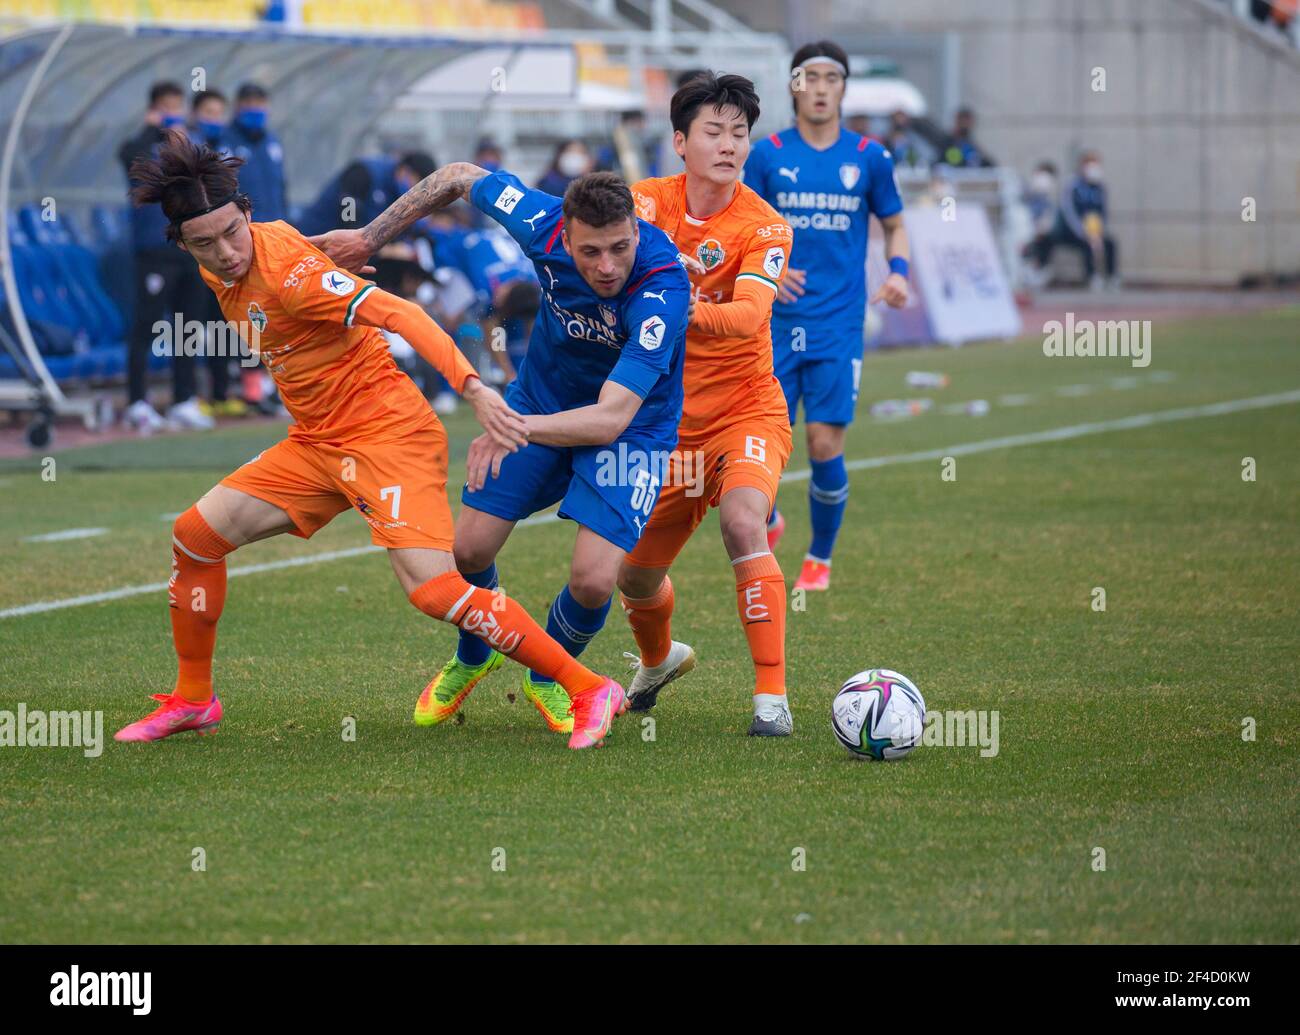 Suwon, South Korea. 14th Mar, 2021. (L-R) Yun Suk-Young (L), Uros Deric of Suwon Samsung Bluewings and Kim Dong-Hyun of Gangwon FC in action during the 4th round of the 2021 K League 1 soccer match between Suwon Samsung Bluewings and Gangwon FC at the Suwon World Cup Stadium.Final score; Suwon Samsung Bluewings 1:1 Gangwon FC. (Photo by Jaewon Lee/SOPA Images/Sipa USA) Credit: Sipa USA/Alamy Live News Stock Photo